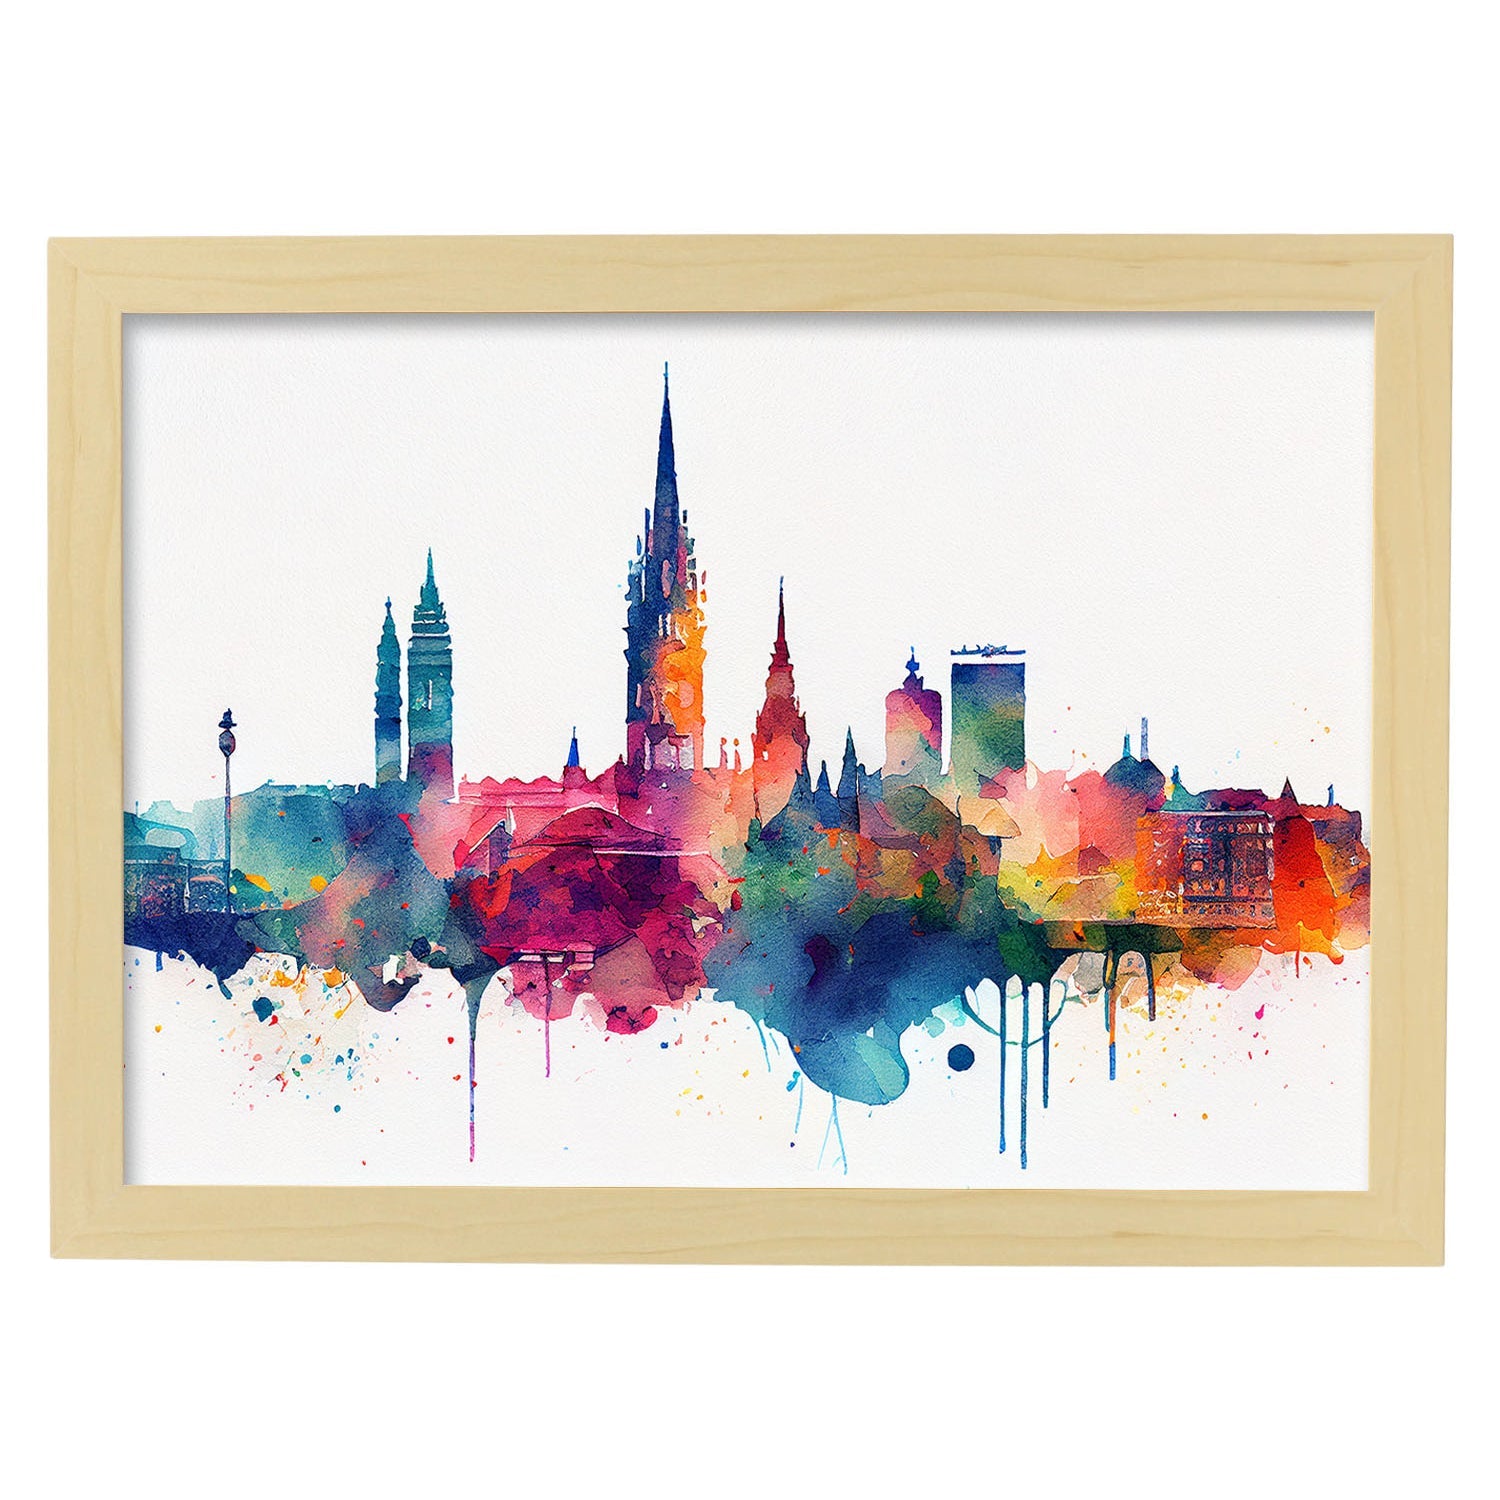 Nacnic watercolor of a skyline of the city of Brussels. Aesthetic Wall Art Prints for Bedroom or Living Room Design.-Artwork-Nacnic-A4-Marco Madera Clara-Nacnic Estudio SL